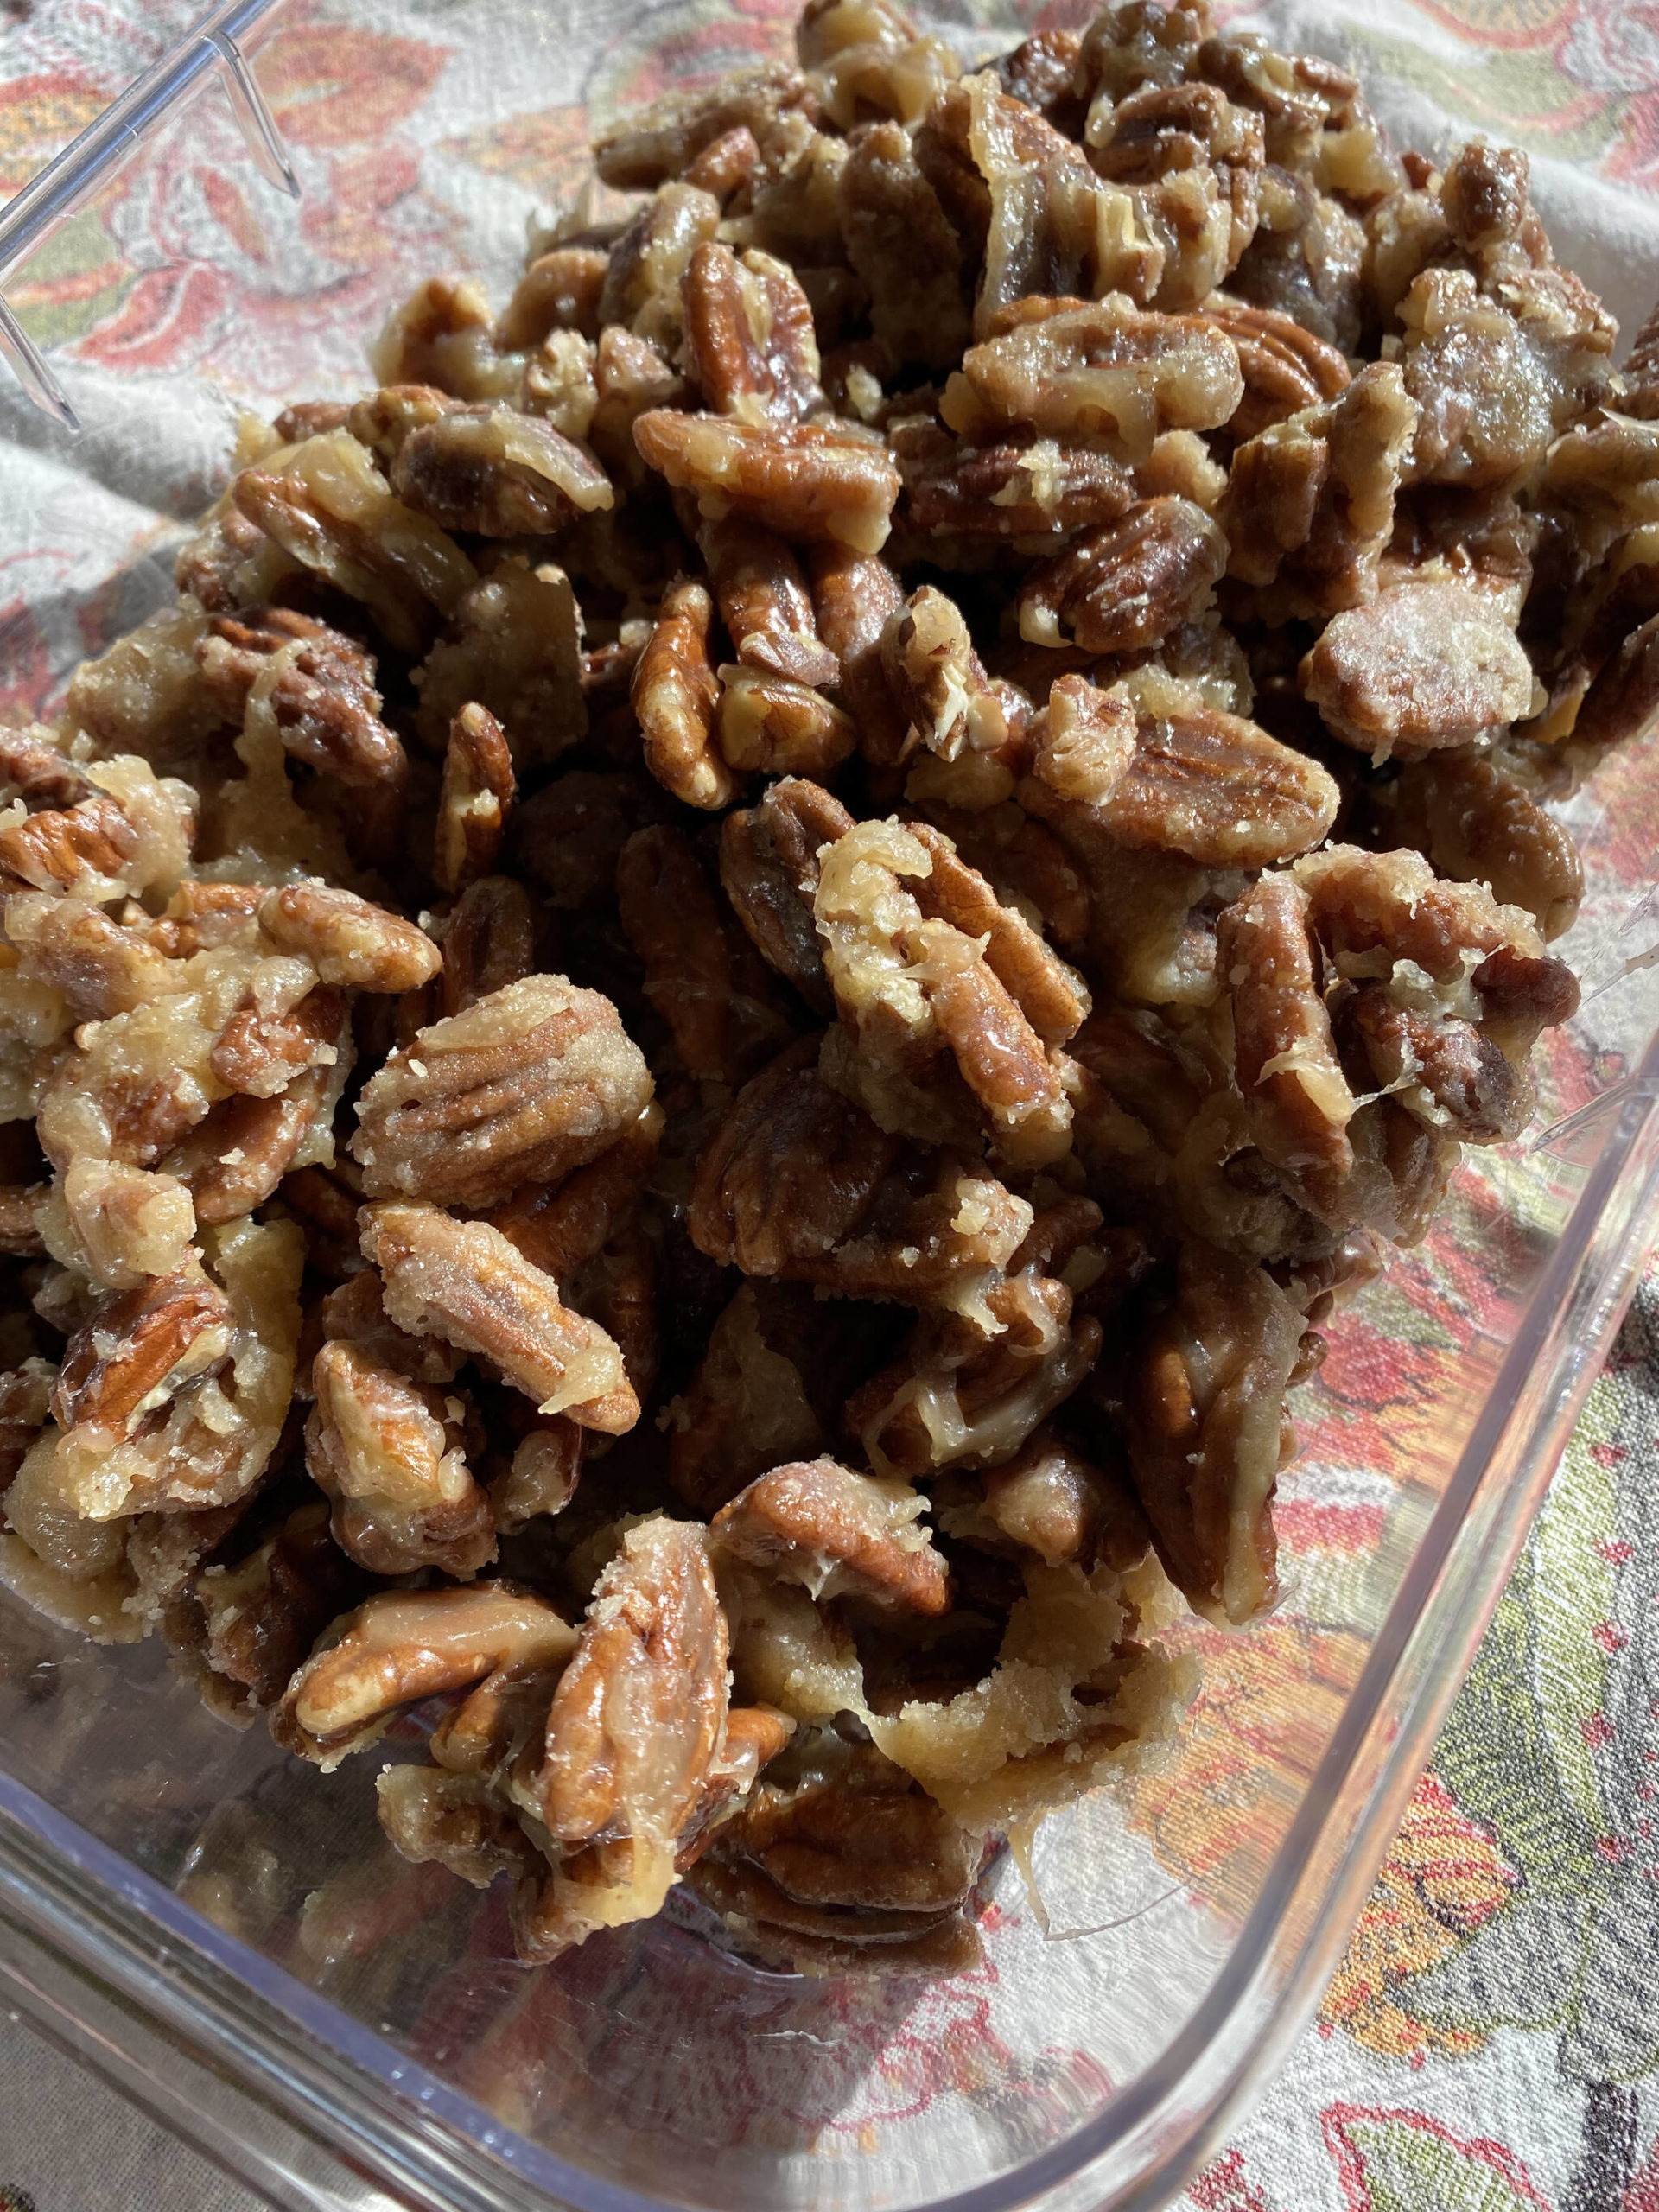 Candy pecans make a roadtrip sweet snack. (Photo by Tressa Dale/Peninsula Clarion)